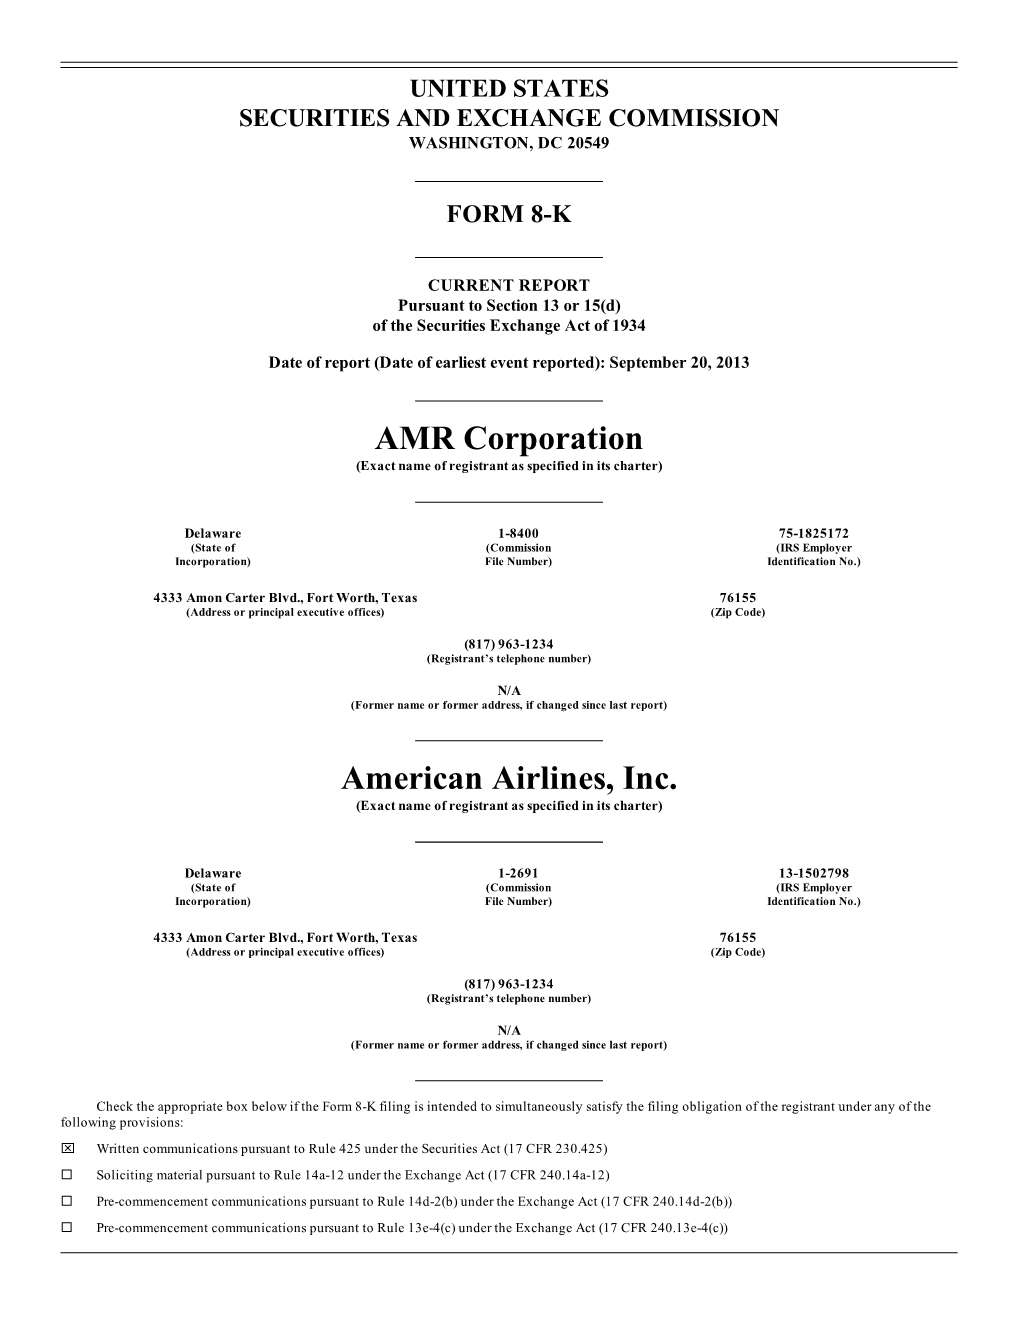 AMR Corporation American Airlines, Inc